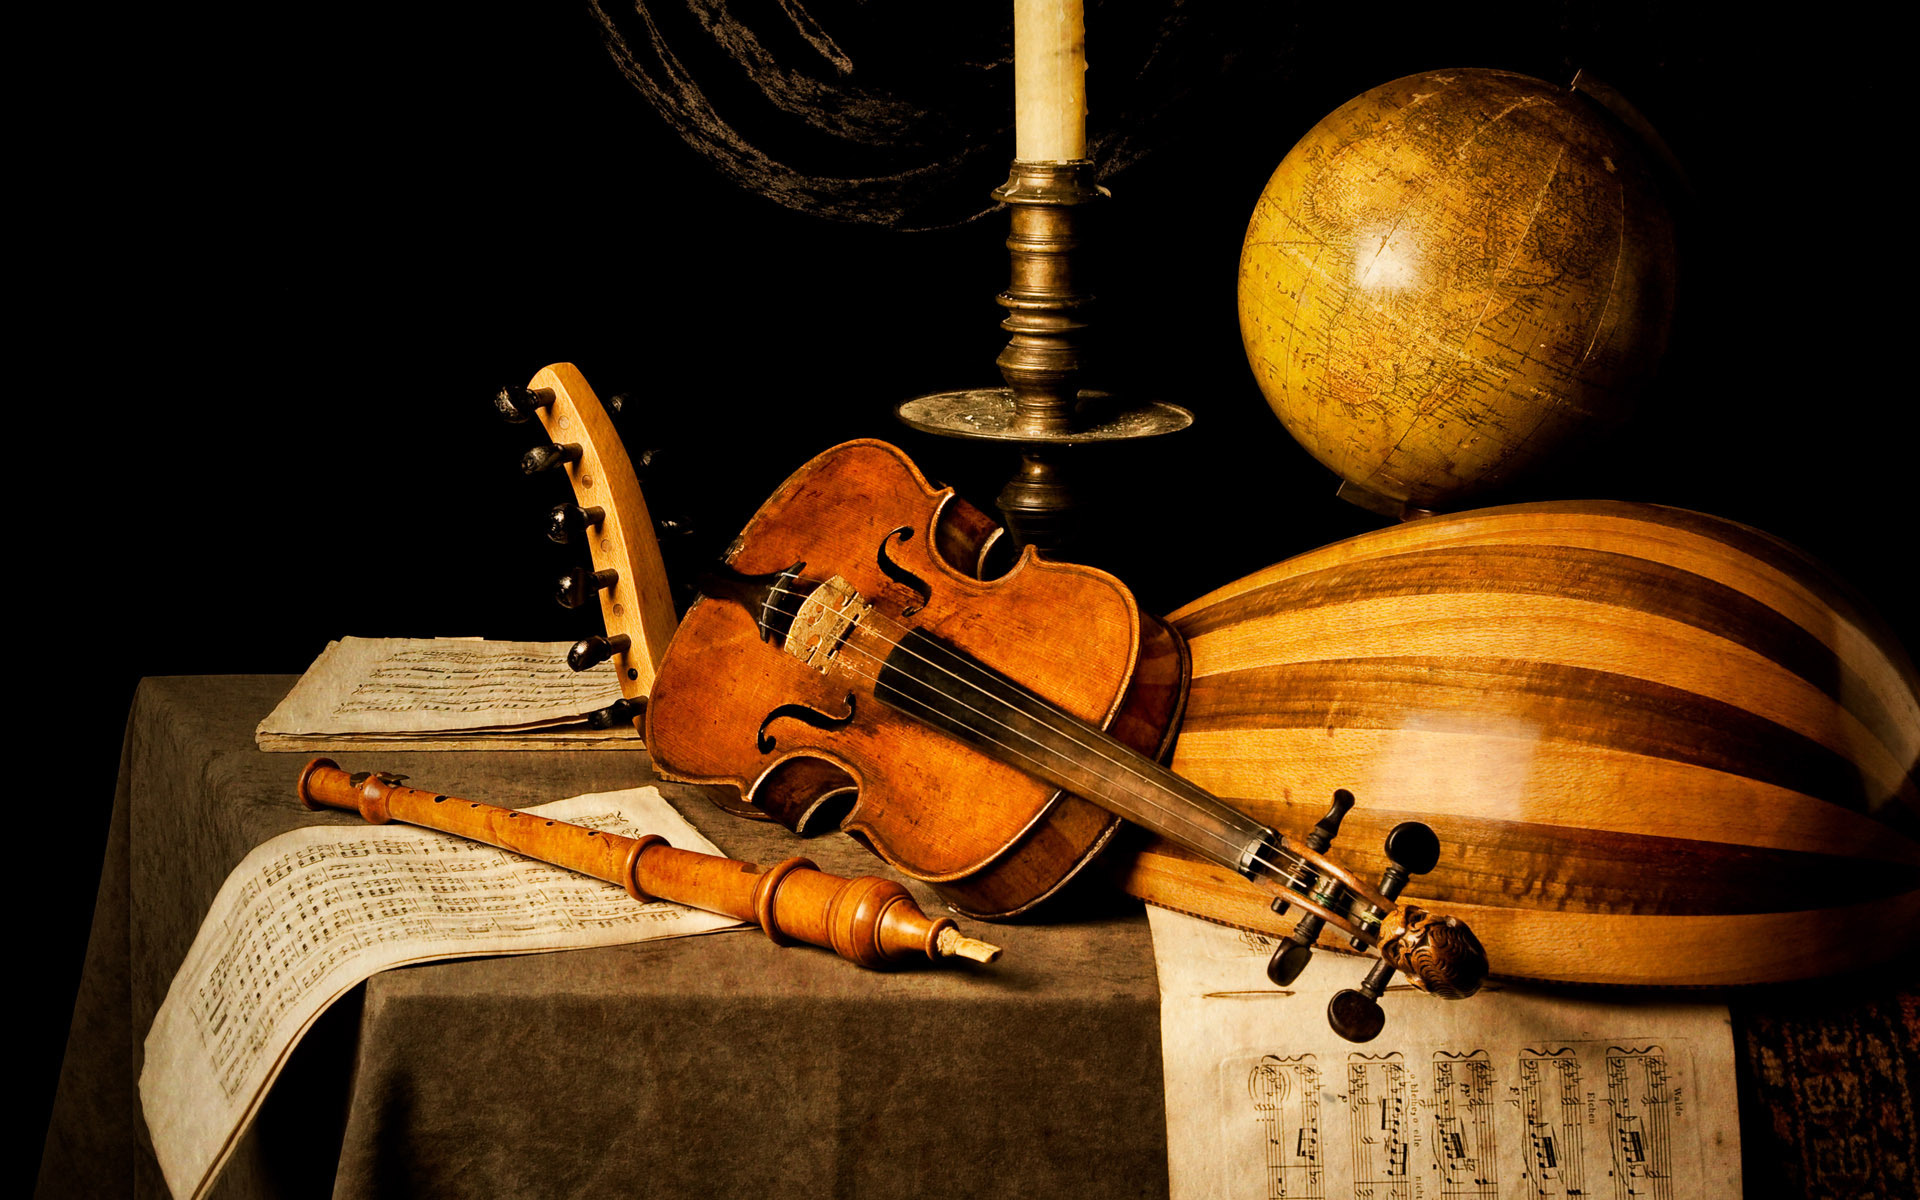 Musical instruments collection, Melodic harmony, Instrument wallpaper, Music enthusiasts, 1920x1200 HD Desktop